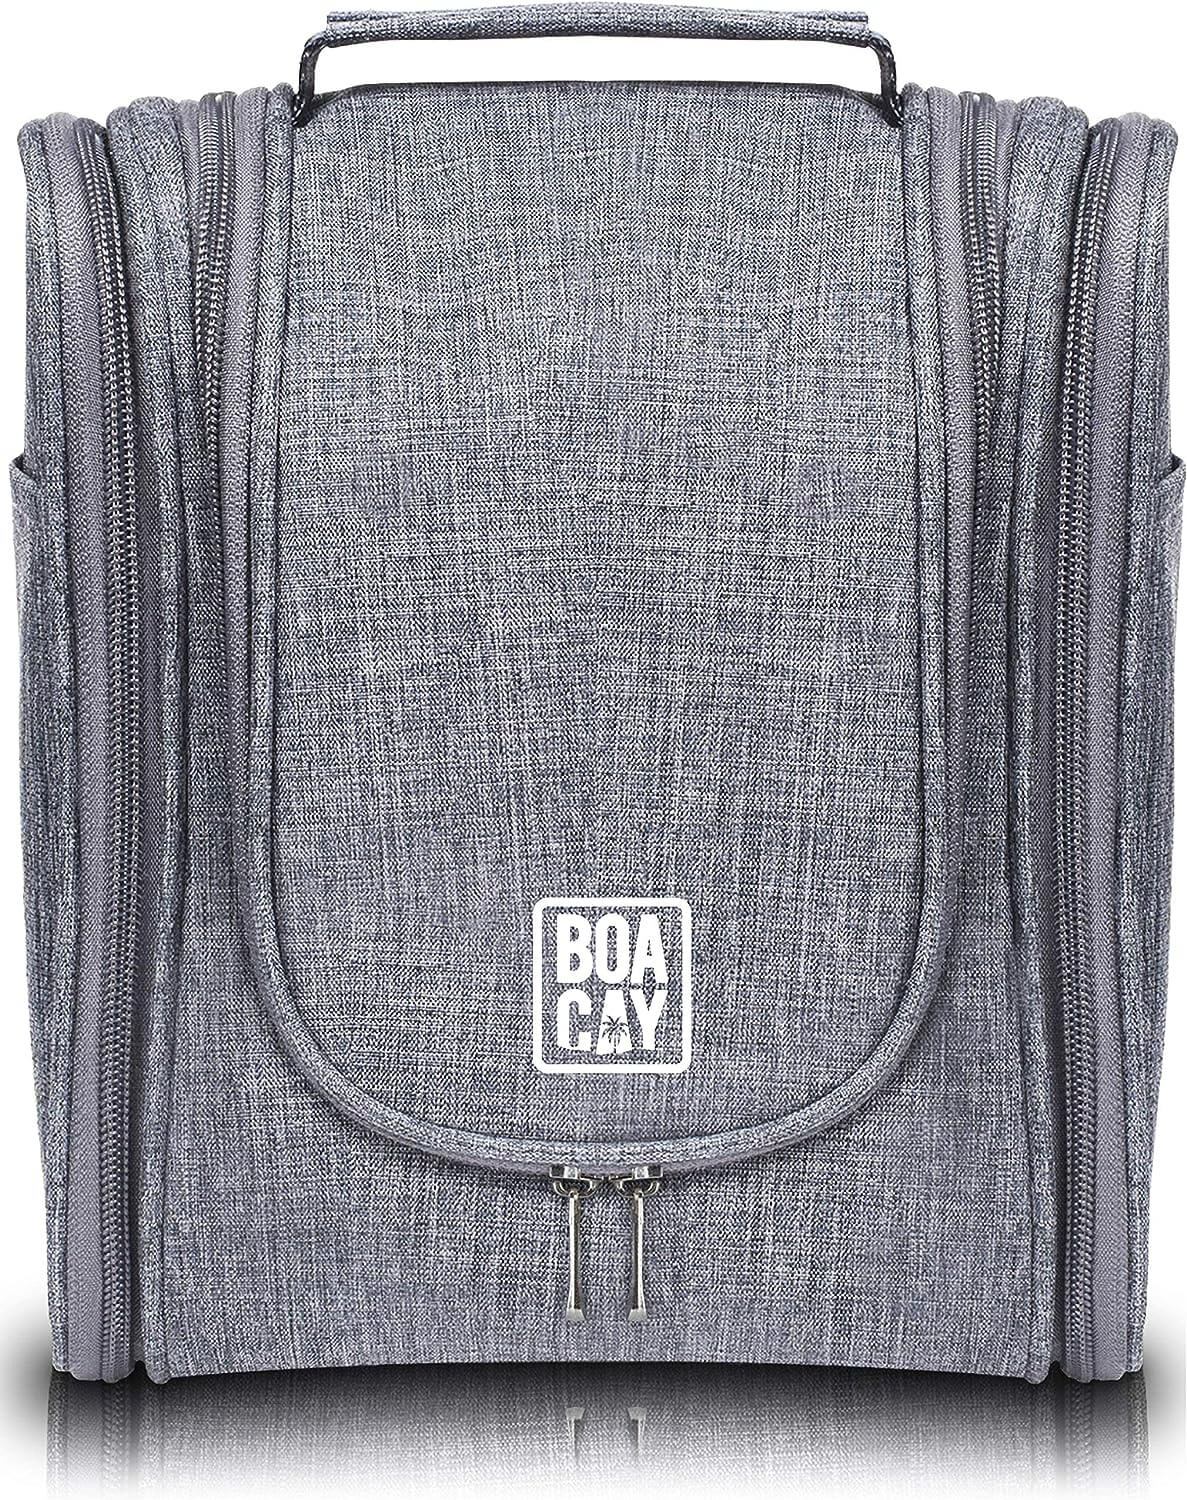 Premium Hanging Travel Toiletry Bag by BOACAY